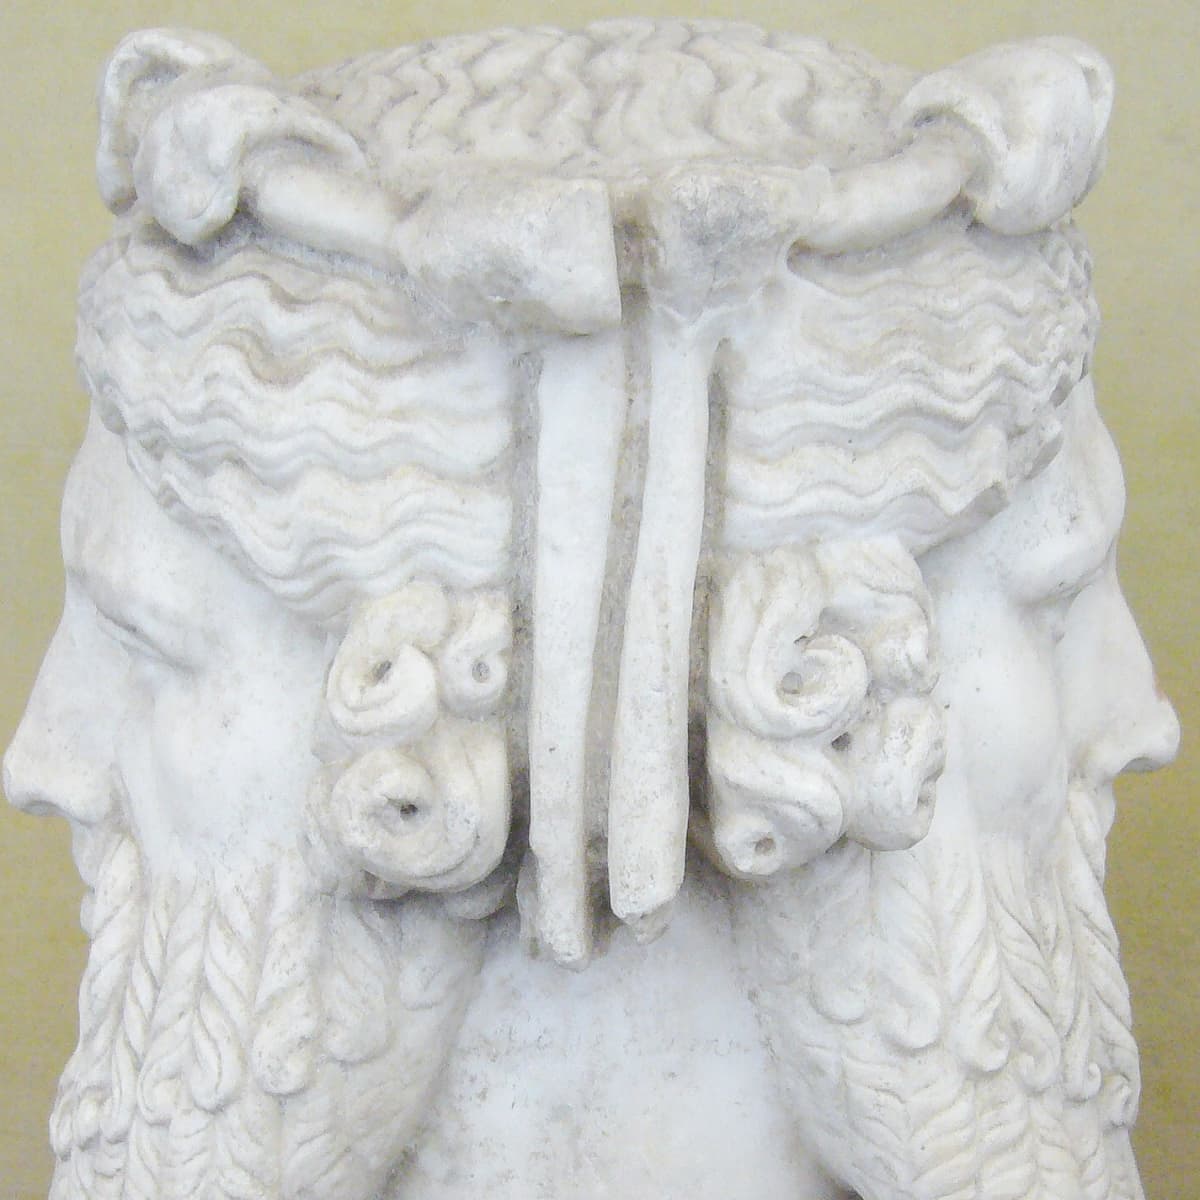 Two-faced Janus